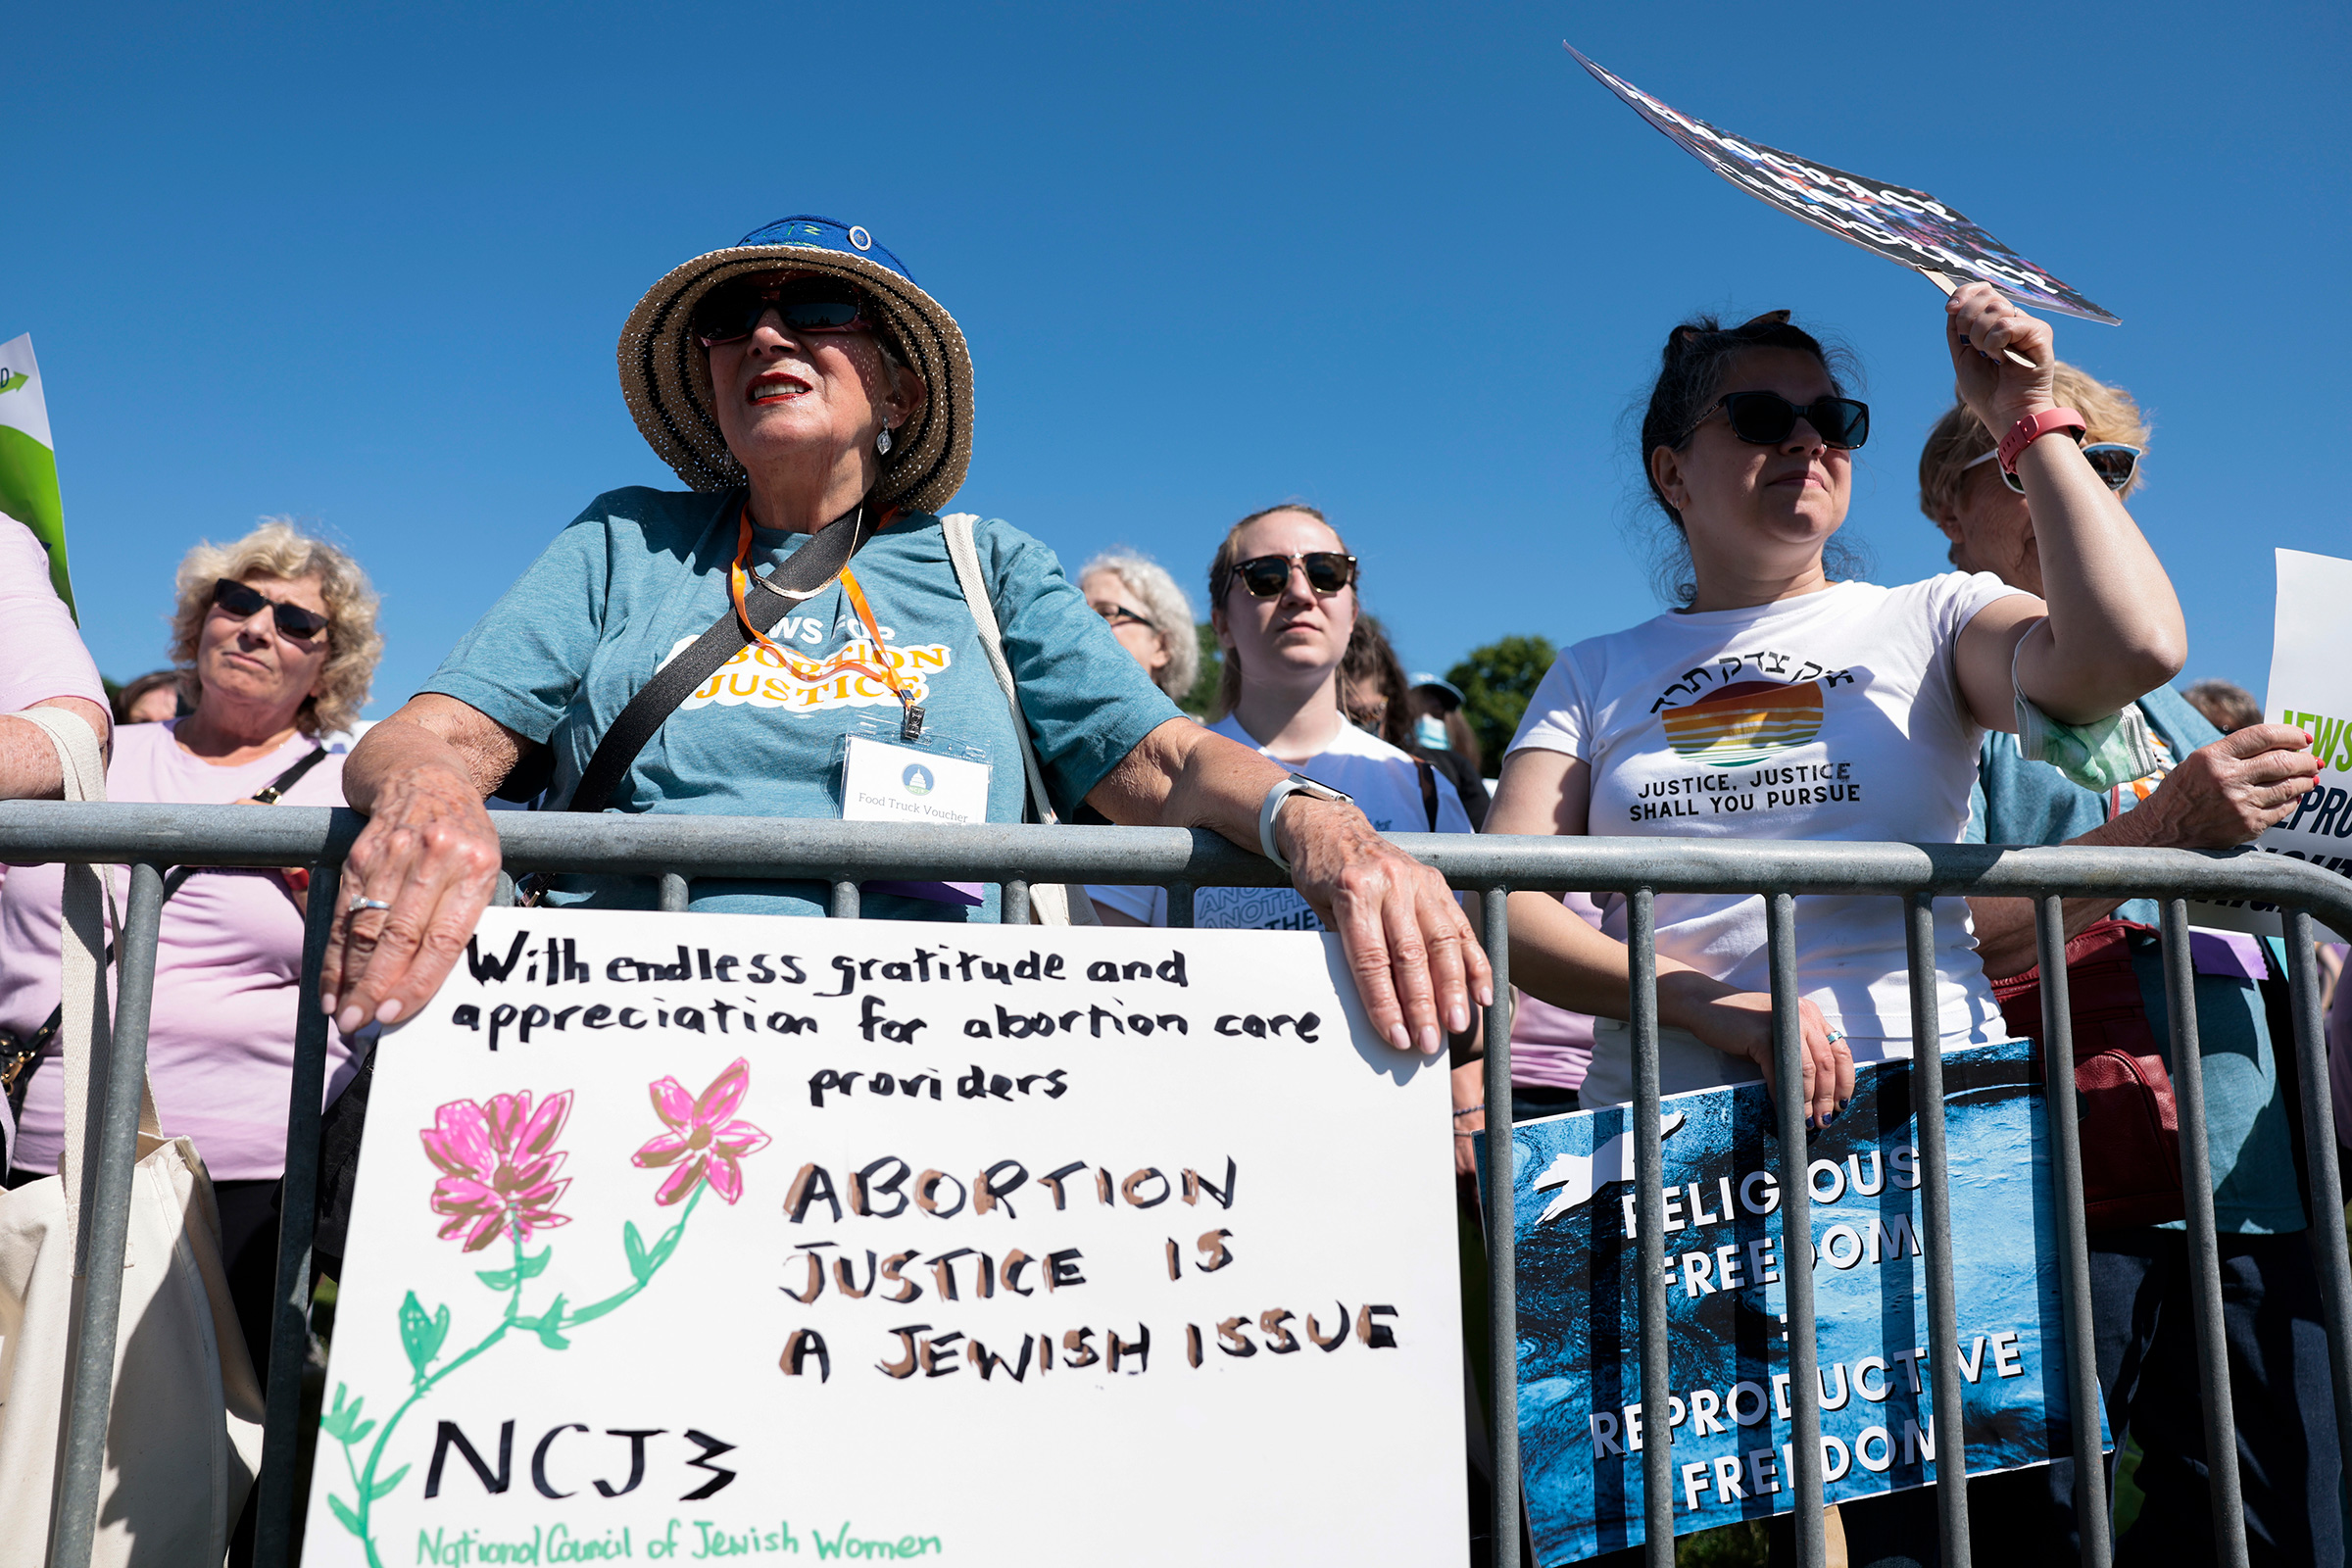 Protesters attend the "Jewish Rally for Abortion Justice" at Union Square in Washington, D.C., on May 17, 2022. (Anna Moneymaker—Getty Images)